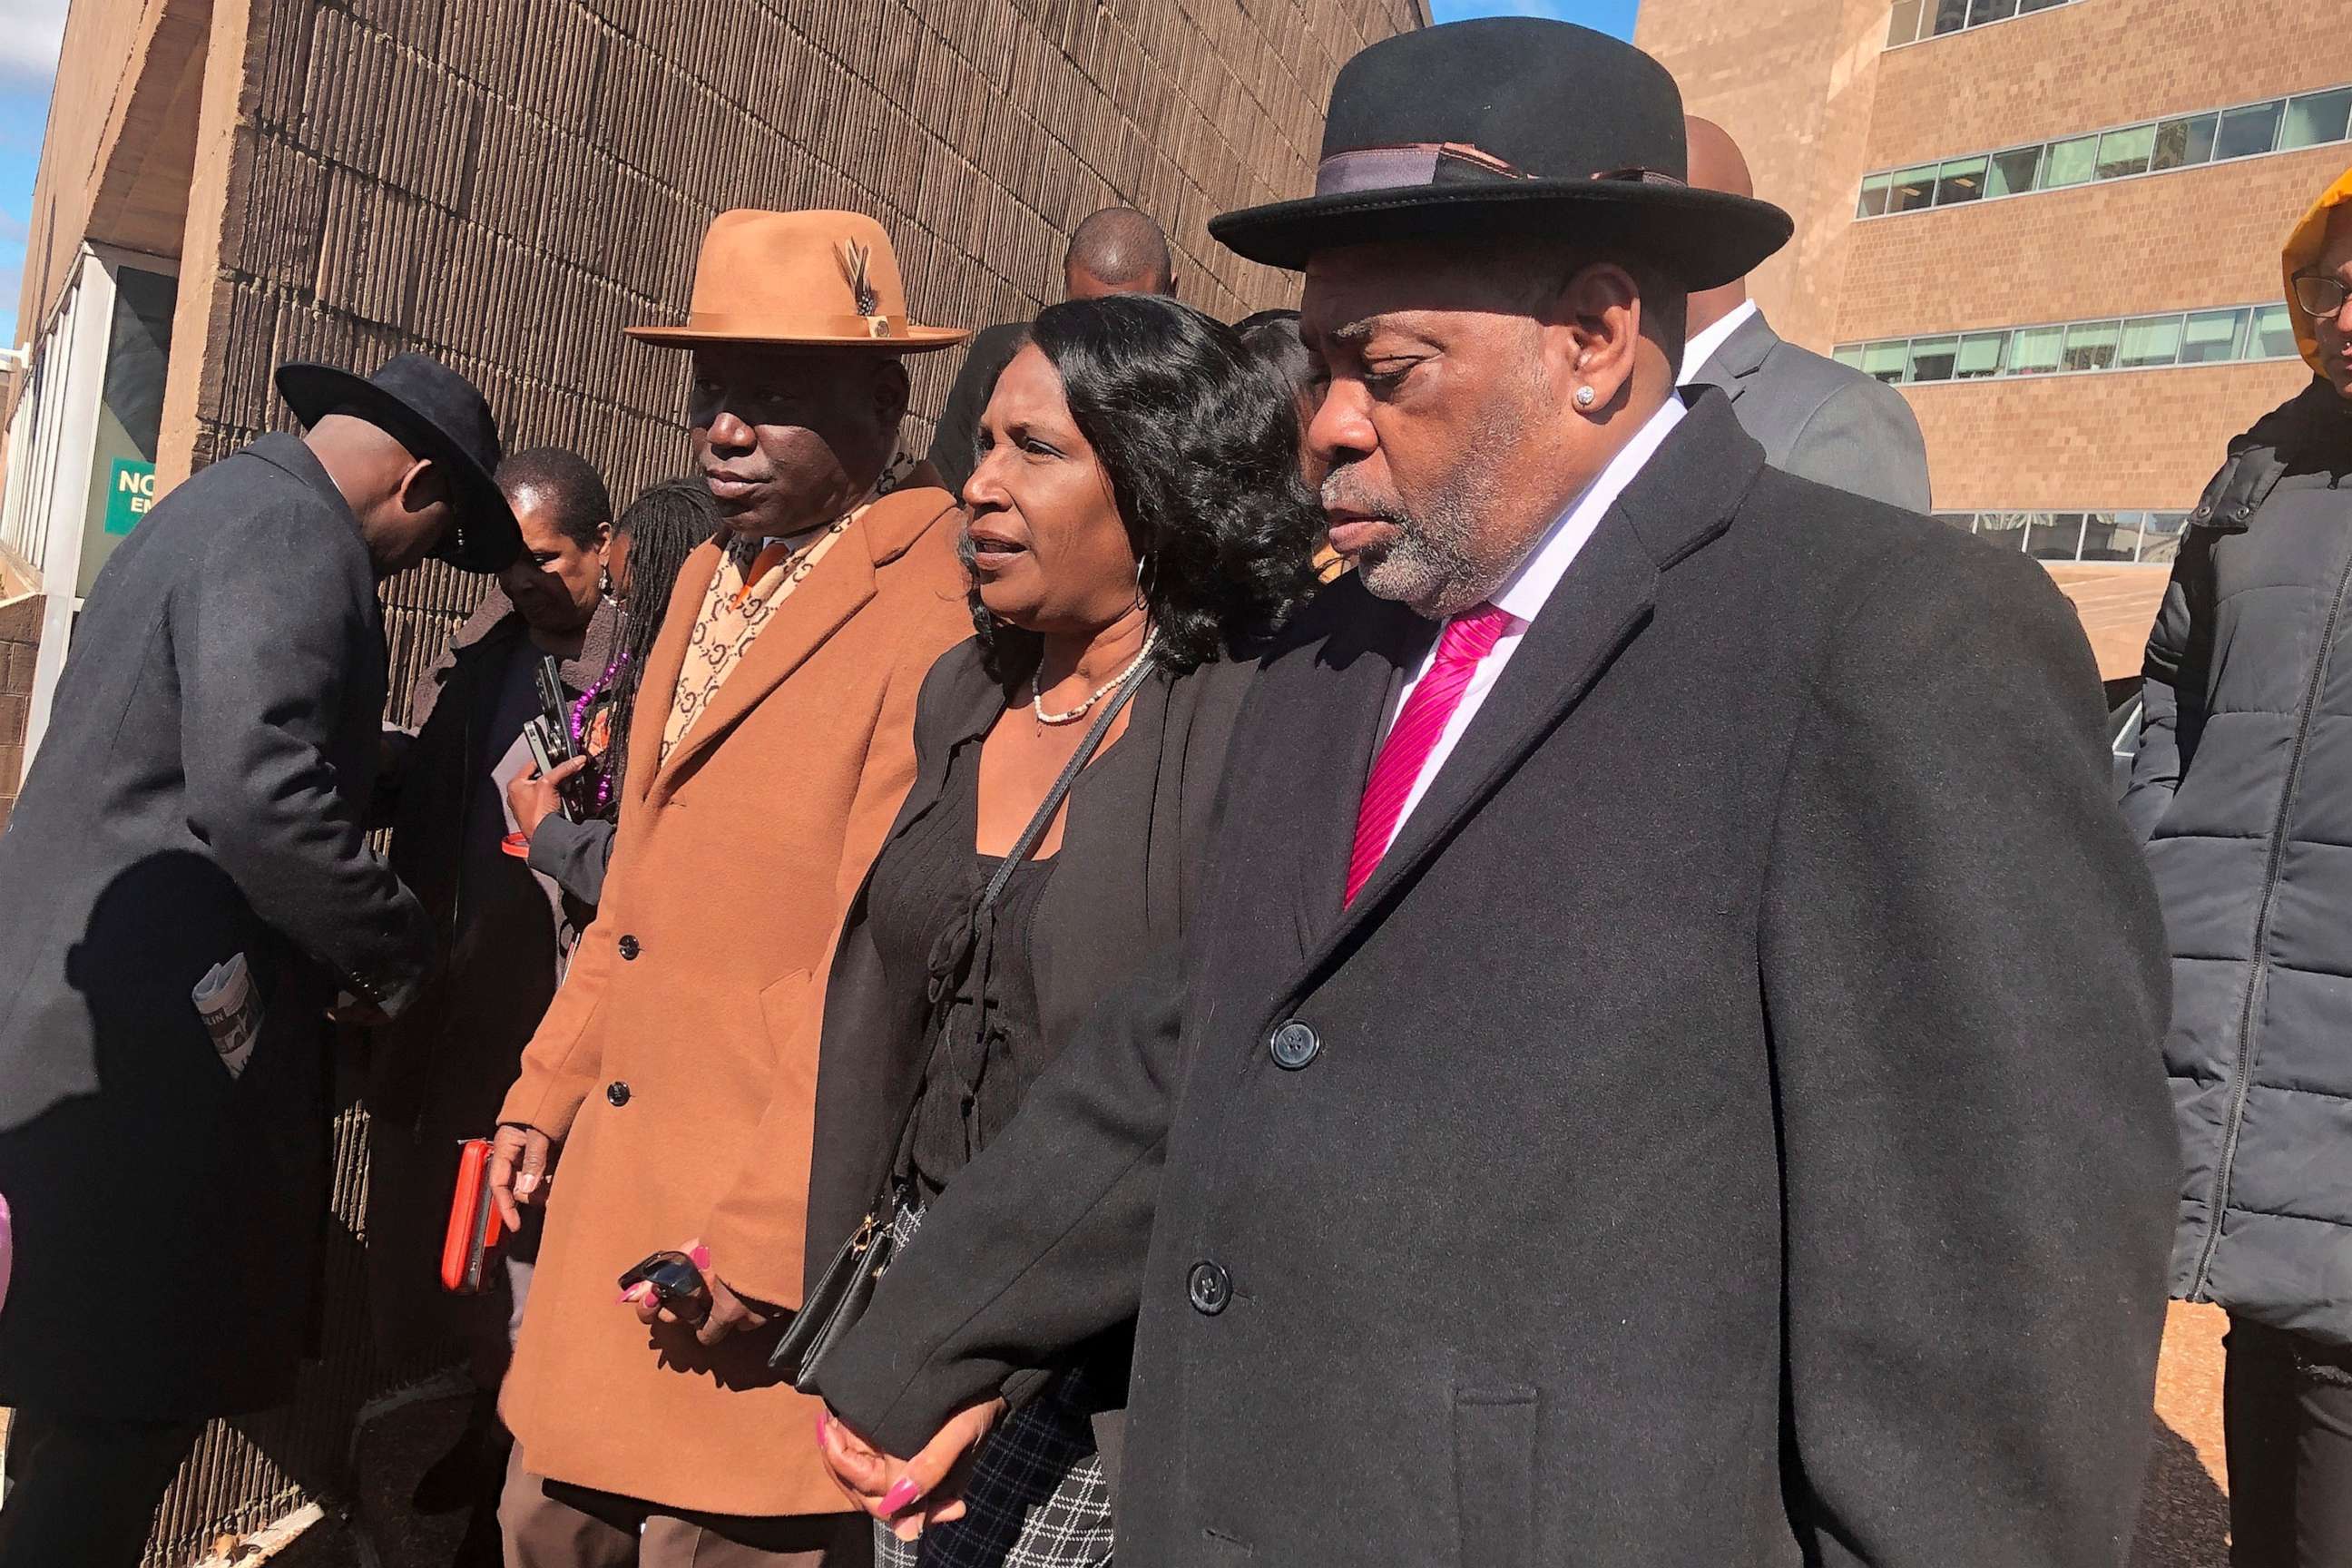 PHOTO:From left, attorney Ben Crump, Tyre Nichols mother, RowVaughn Wells, and stepfather, Rodney Wells exit the courthouse, Feb. 17, 2023 in Memphis.